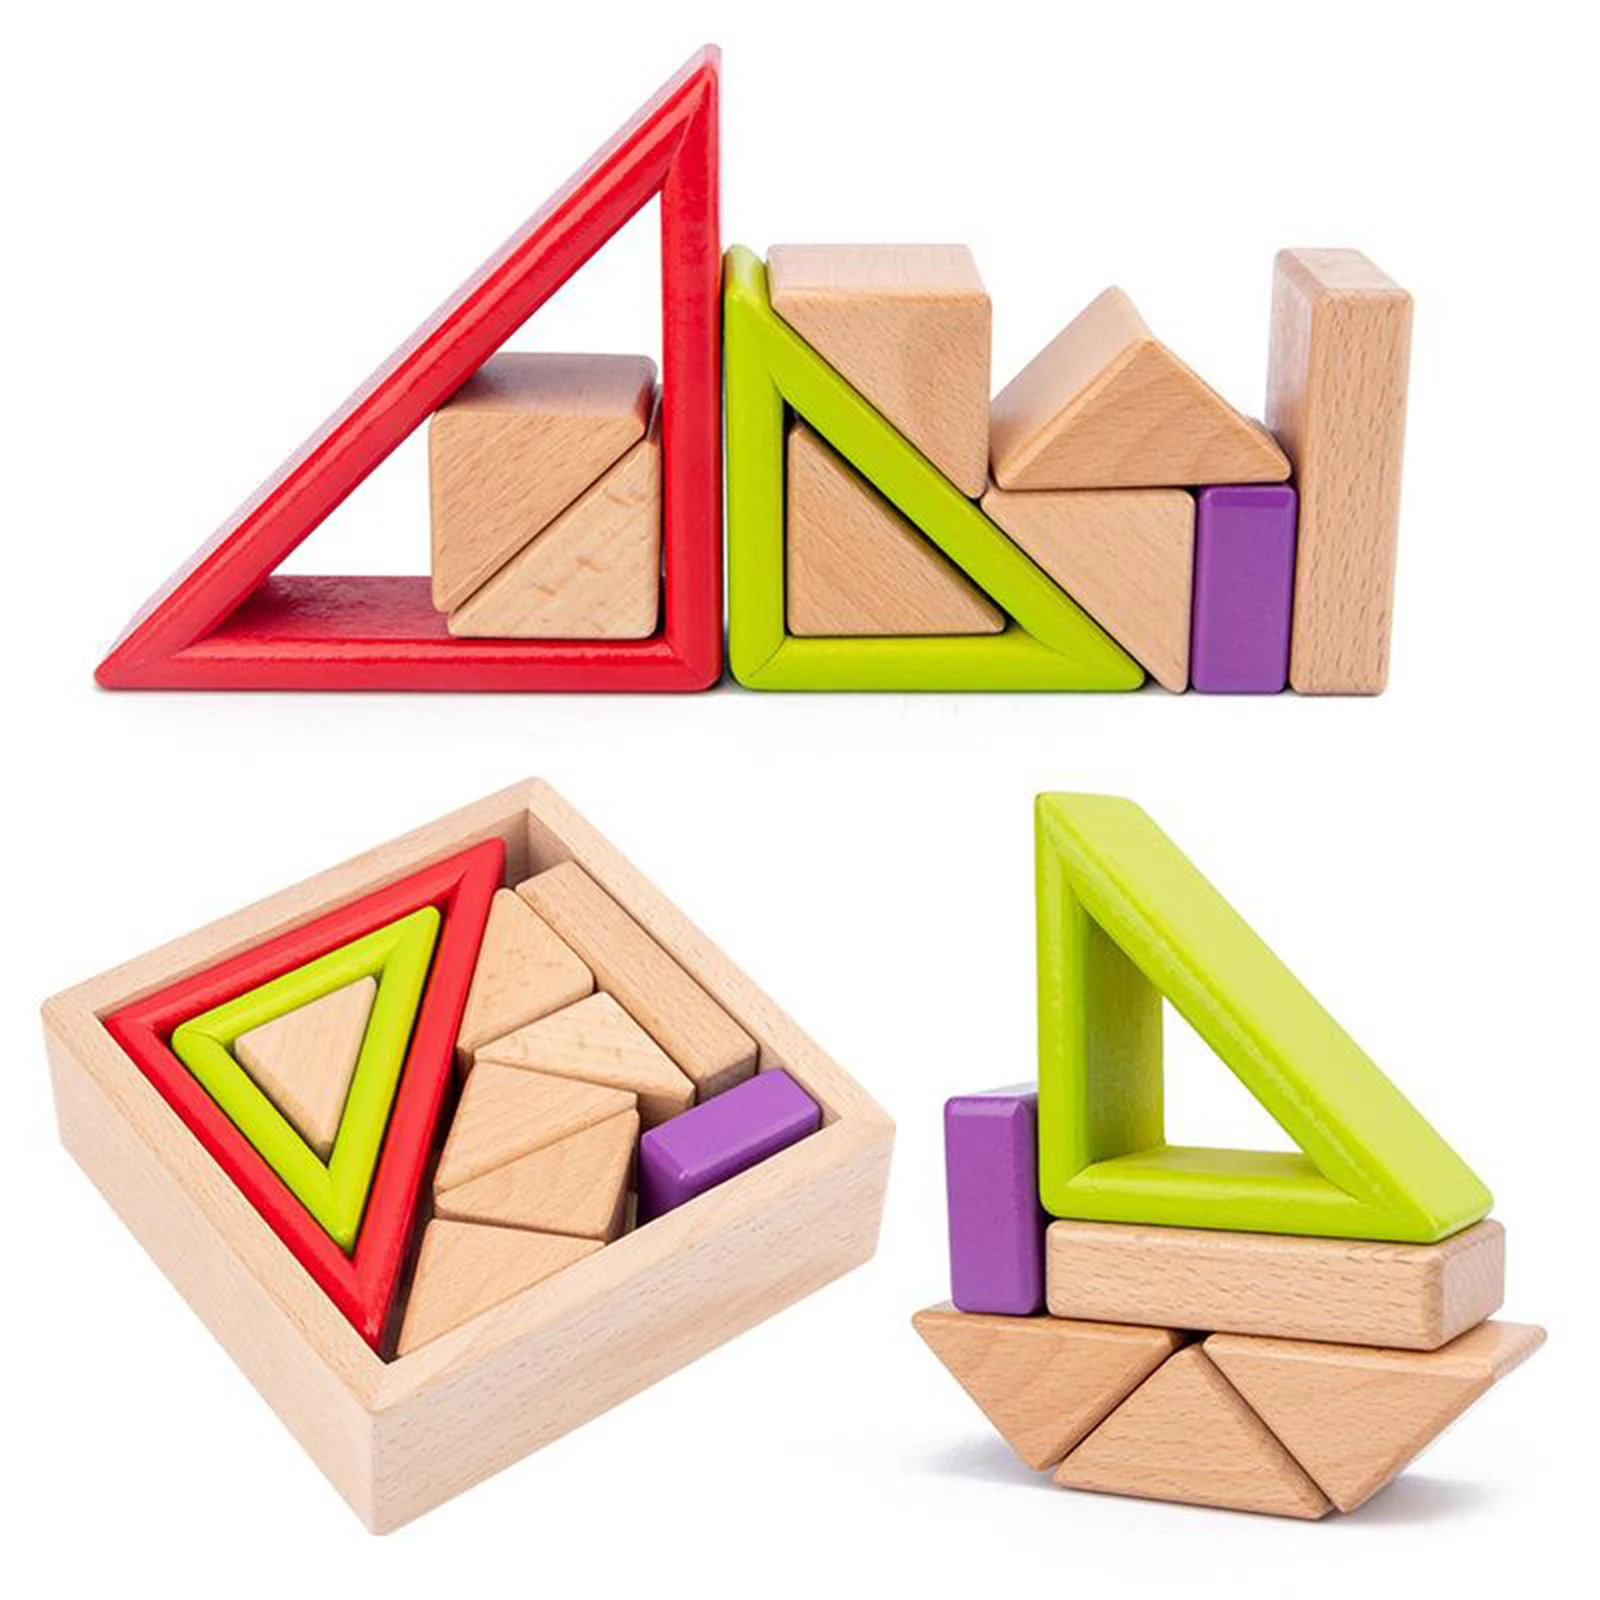 9PCS Wooden Toy Montessori Rainbow Building Blocks Stacking Game Blocks Early Educational Toy For Children